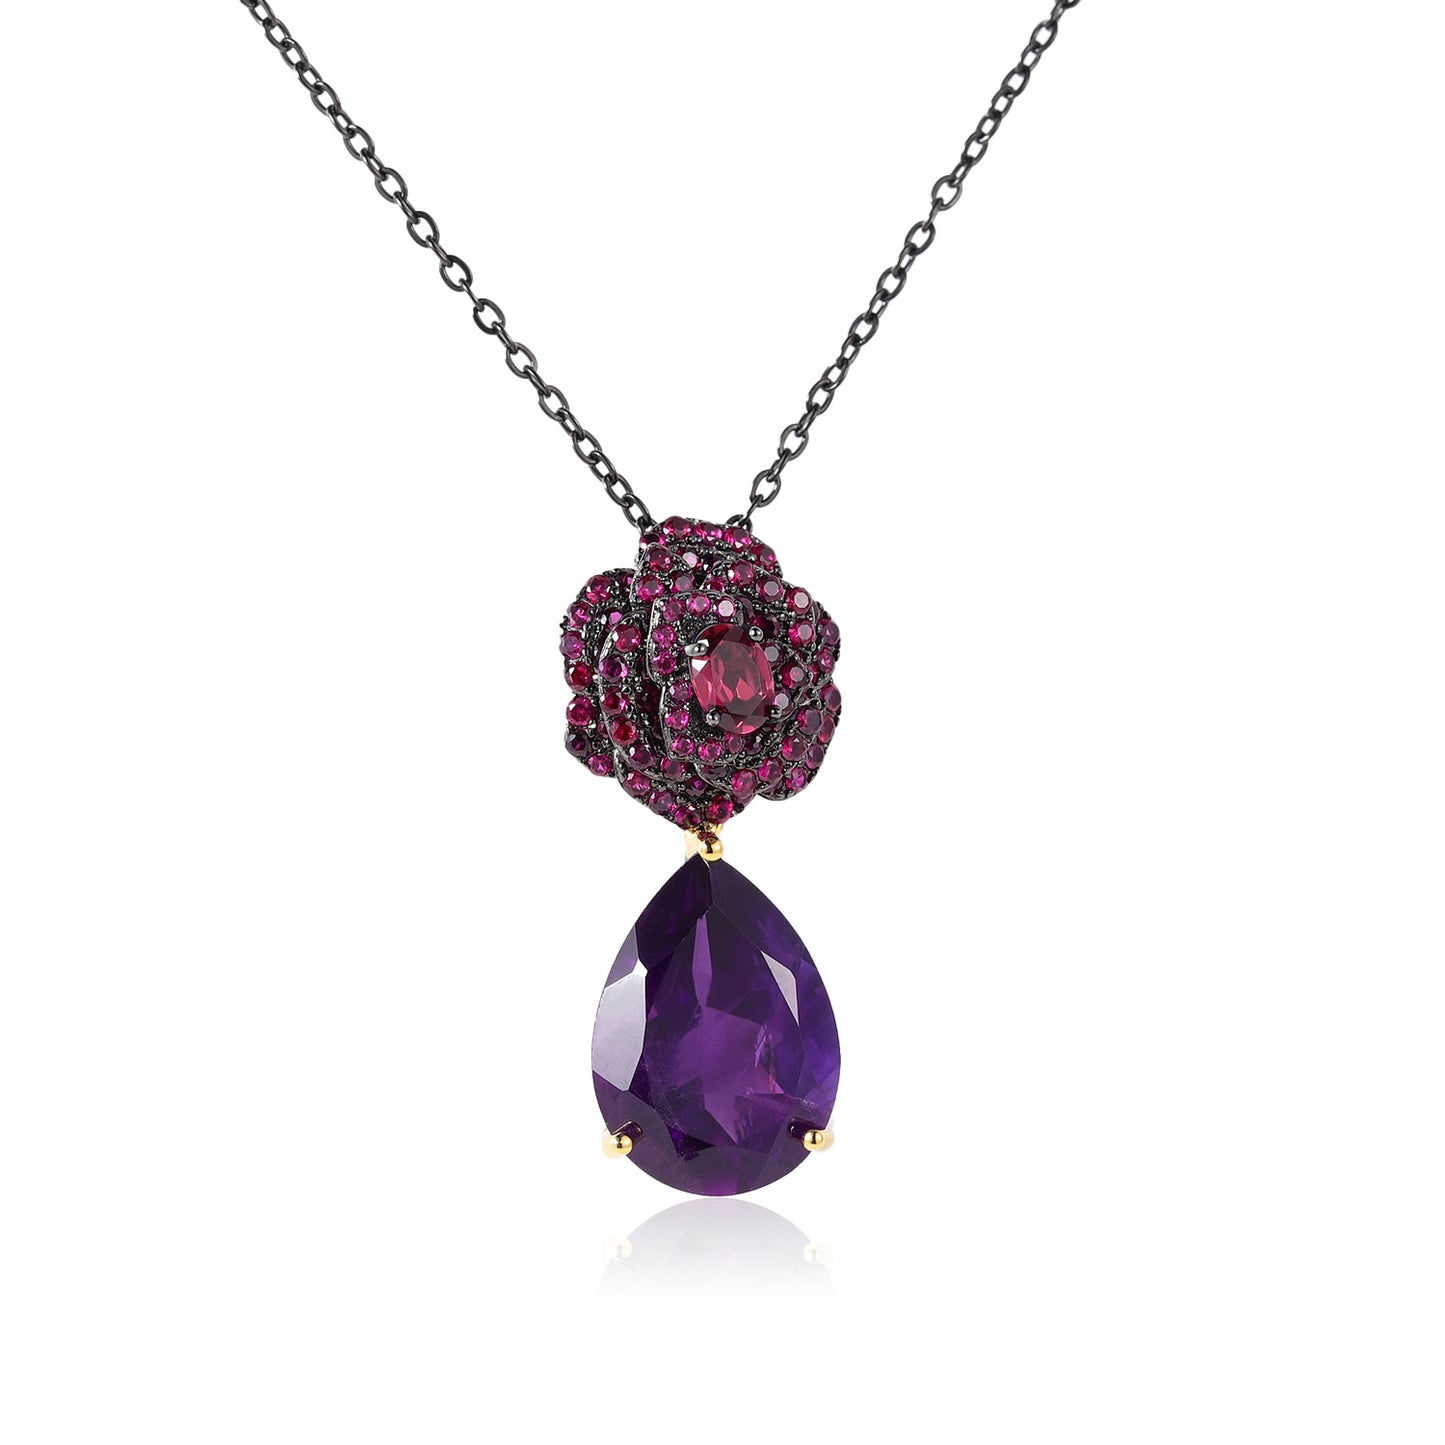 Charm Luxury Style Inlaid Gemstones with Natural Amethyst Rose Tears Pendant Silver Necklace for Women